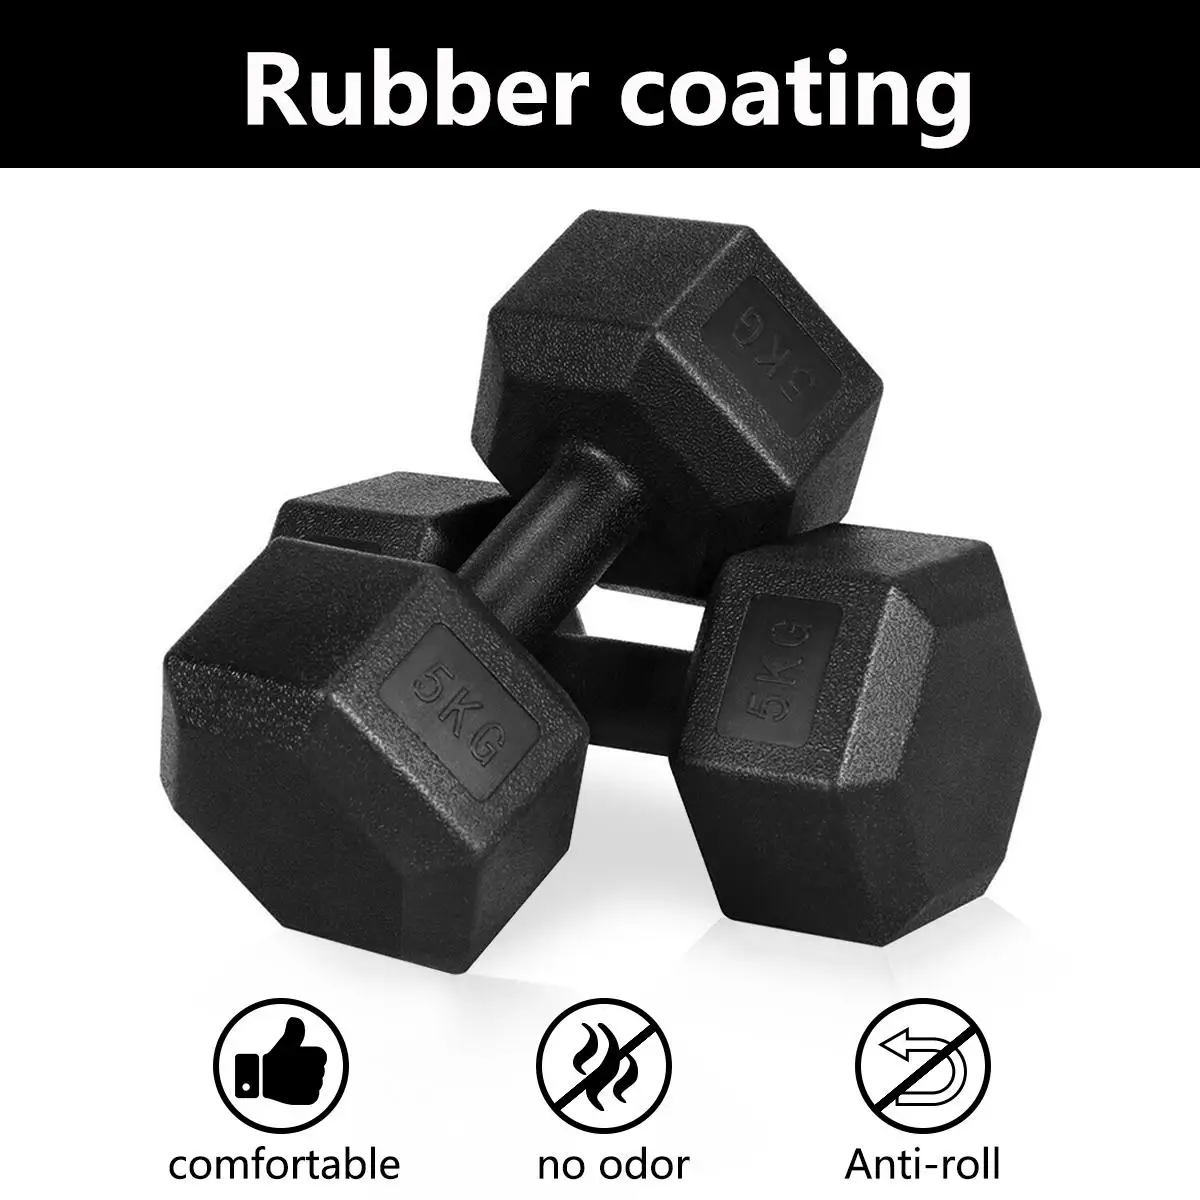 

Hexagon Dumbbells Gym Weights for Exercise Dumbbell Gym Equipment Fitness Equipment 5-10kg Set of 2 Units Dropshipping